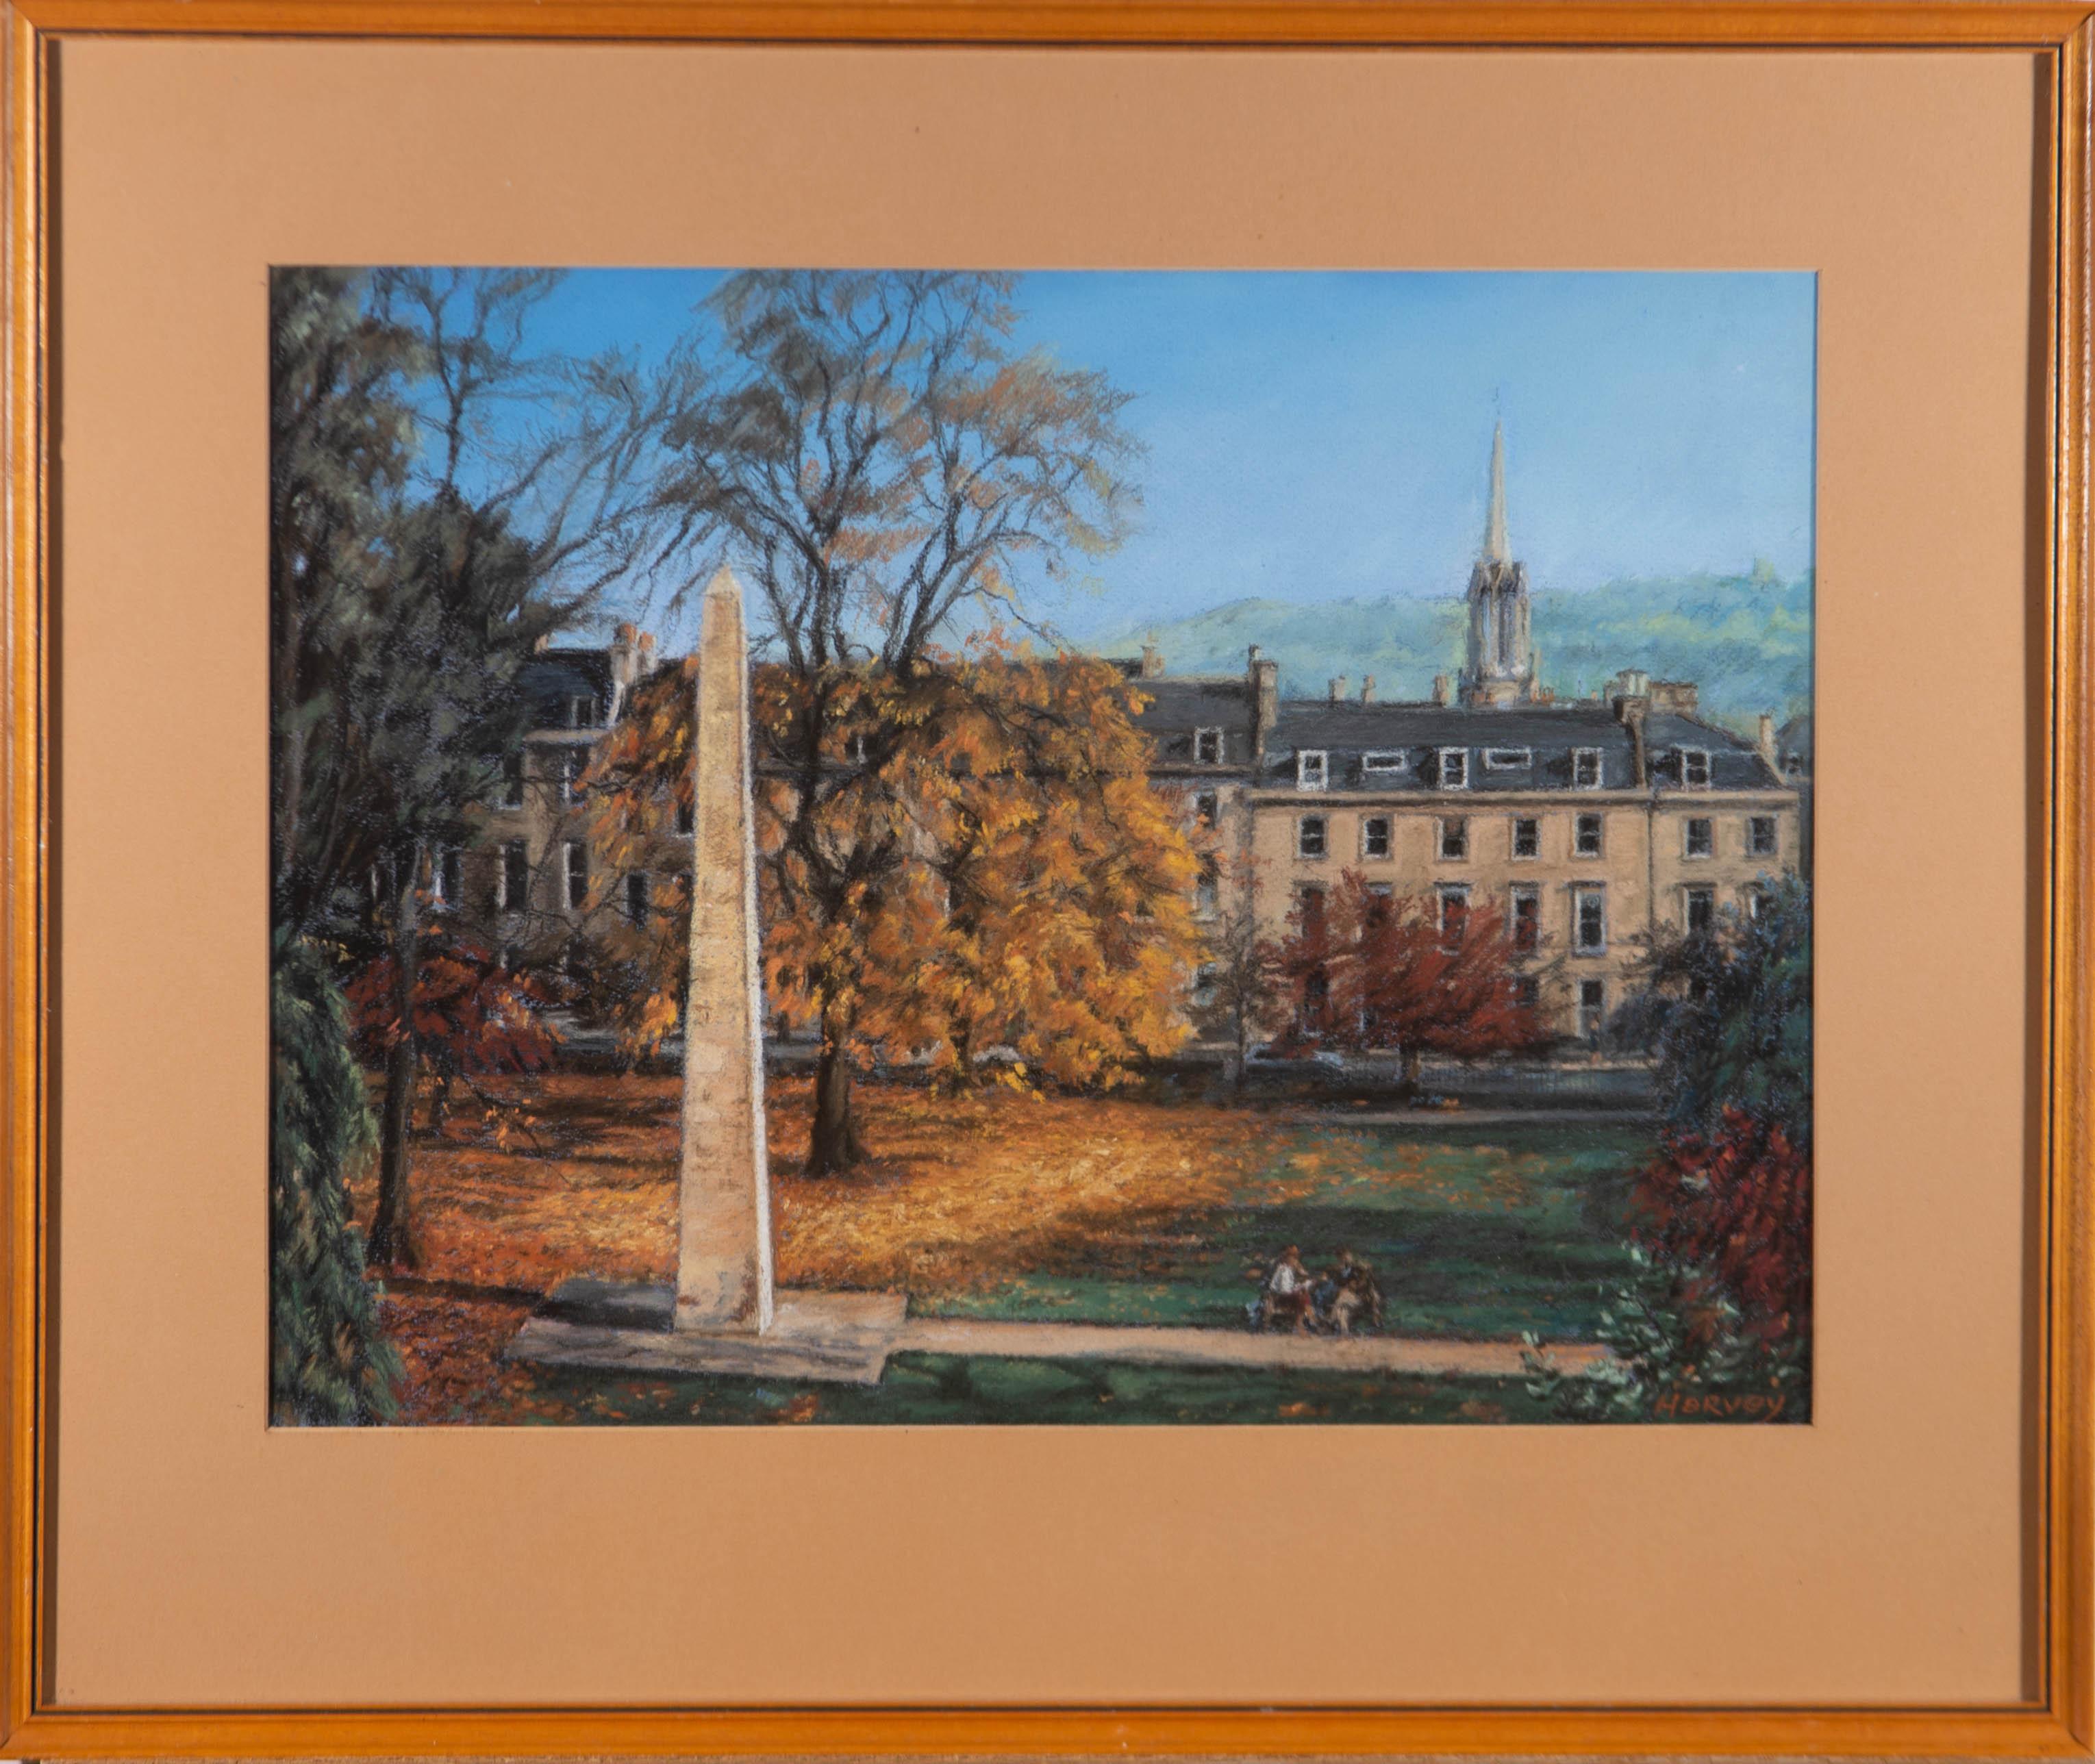 A vibrant autumn pastel showing Queen's Square in Bath covered in golden leaves under a clear blue sky. The artist is clearly skilled and confident with the medium as they manage to mix expressive Marks in the trees with exact, architectural detail